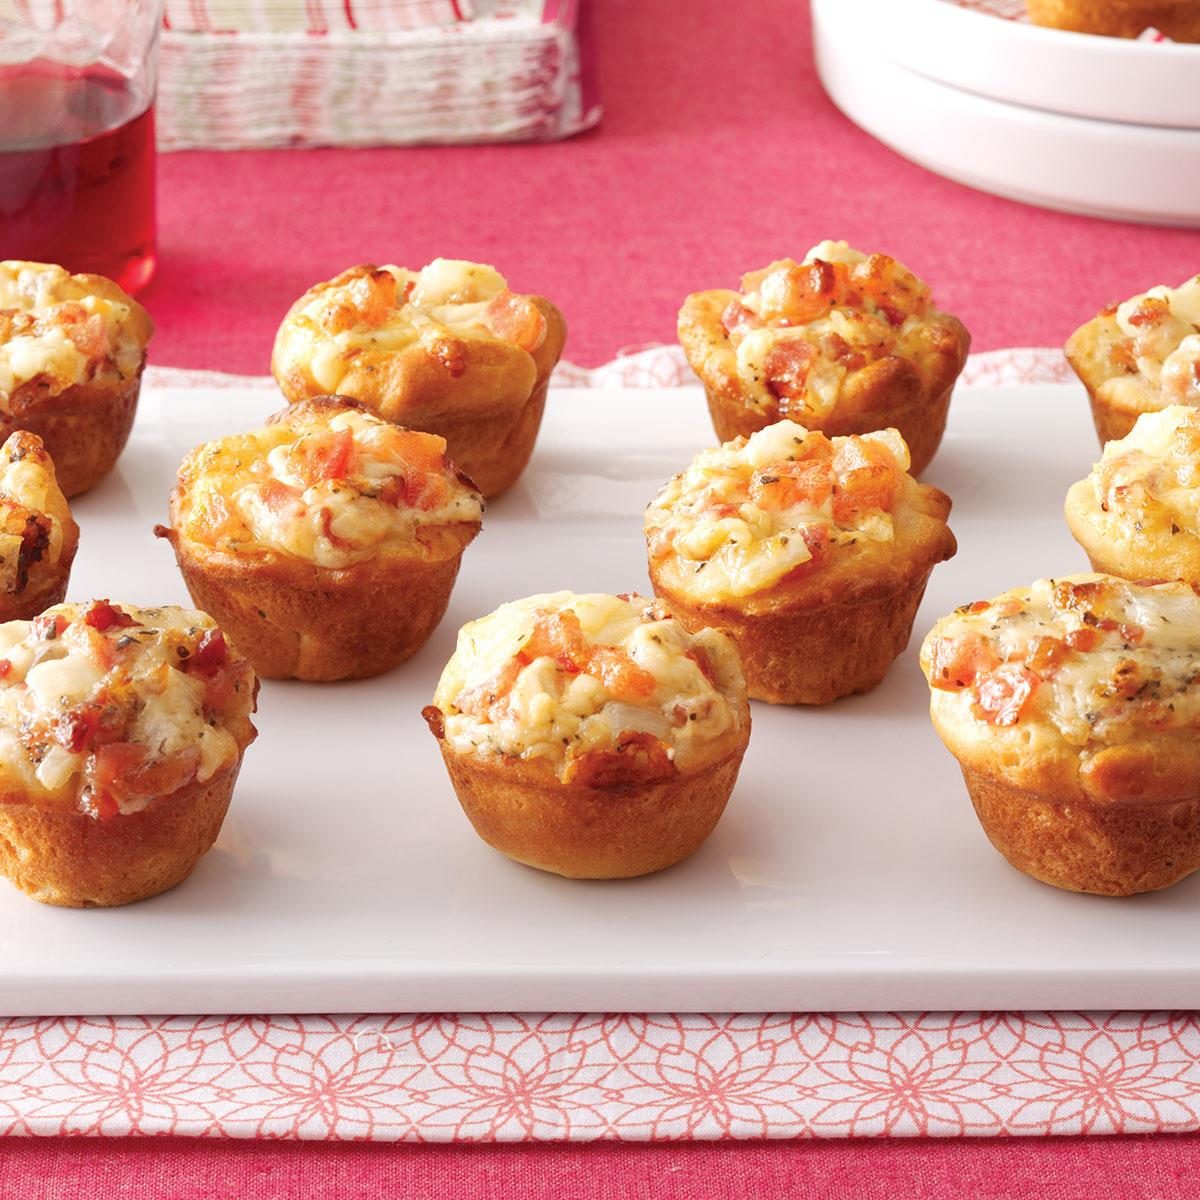 https://www.tasteofhome.com/wp-content/uploads/2018/01/Tomato-Bacon-Cups_exps32702_RDS2928497C11_05_6bC_RMS-5.jpg